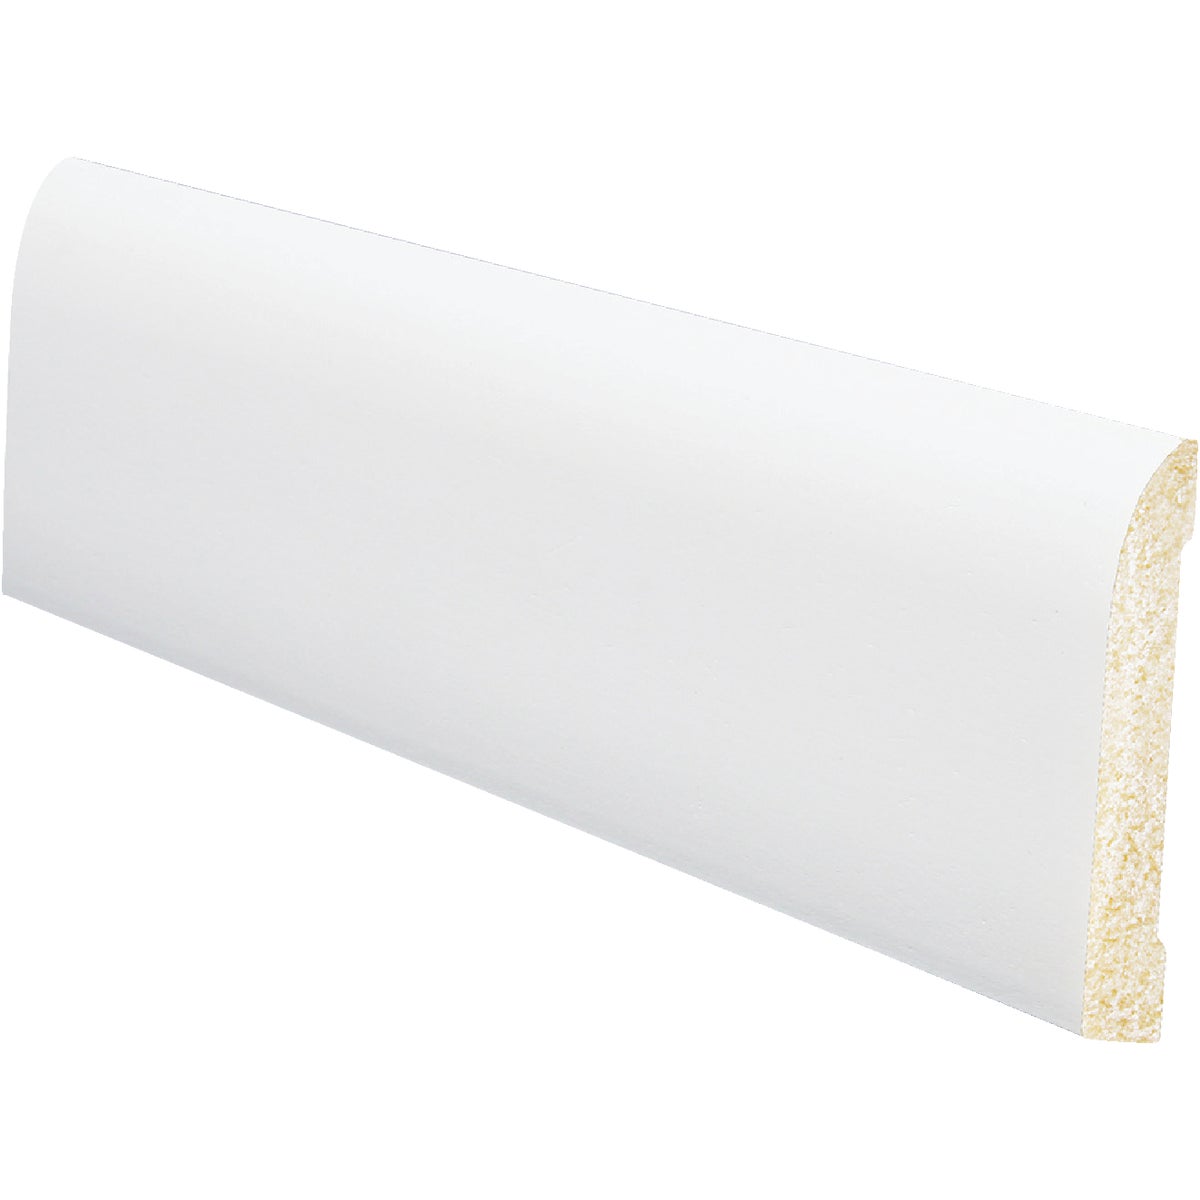 Item 160505, Pre-finished ranch base molding that is easy to install.